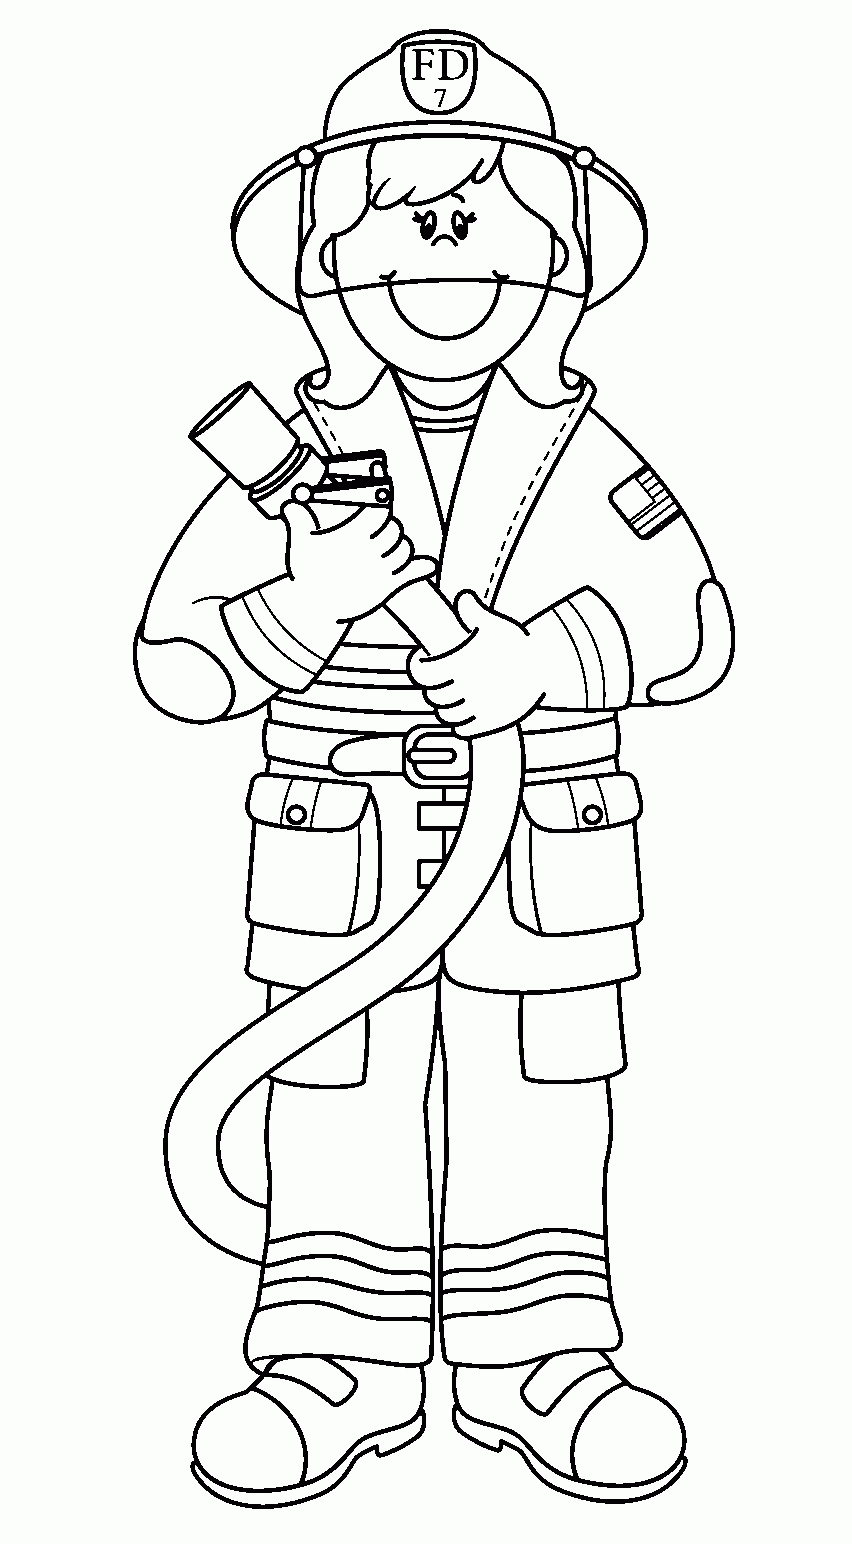 Occupation Coloring Pages - Coloring Home